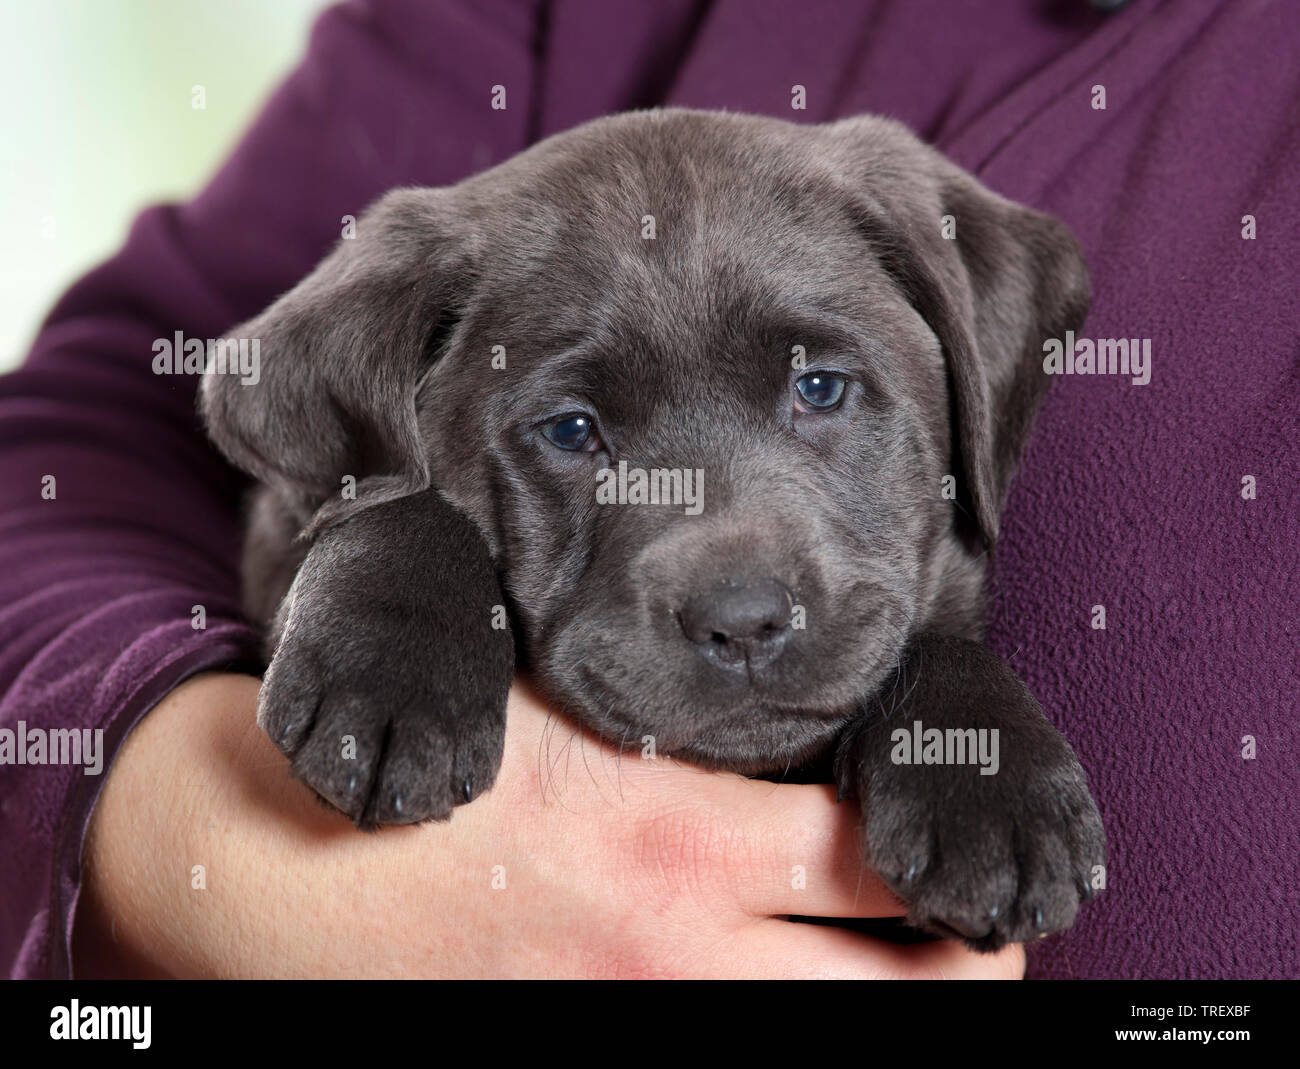 Labrador Retriever. Puppy in the arms of a person. Germany Stock Photo